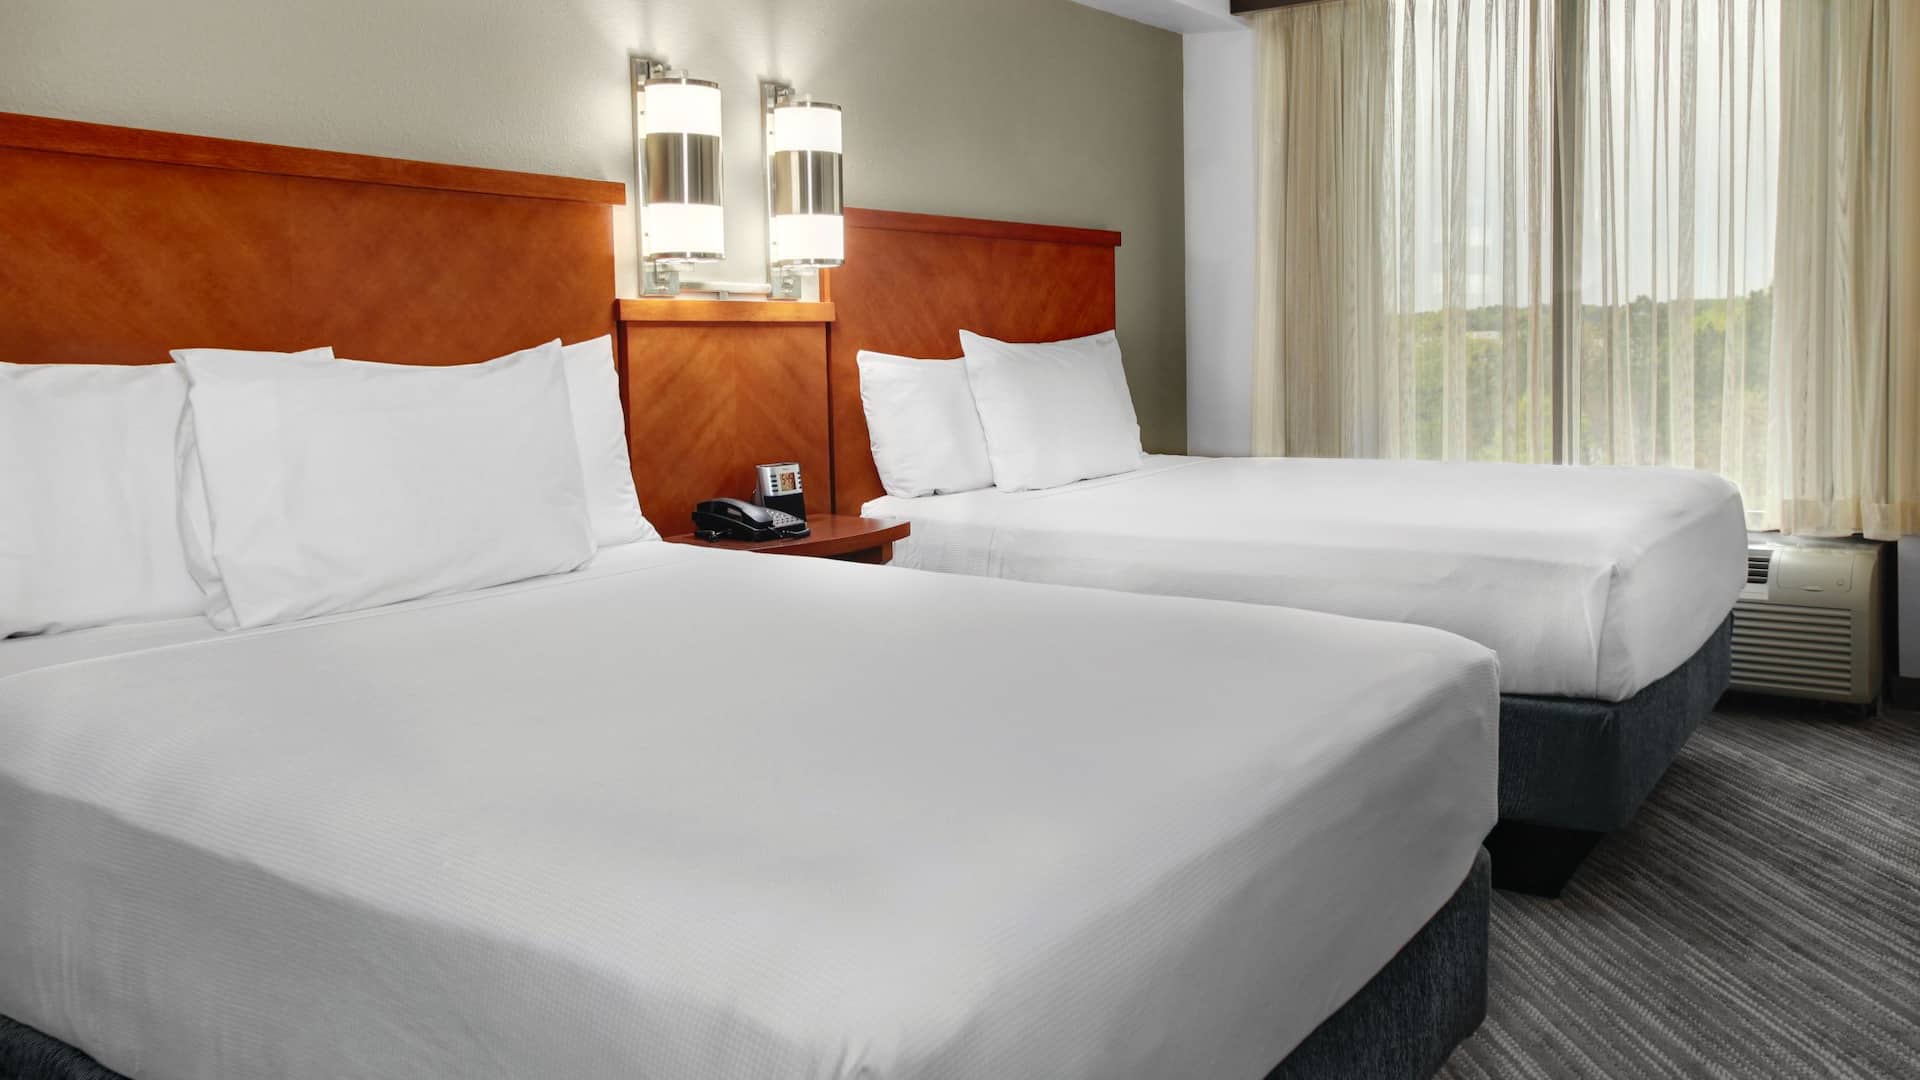 Denver hotel near the airport guestroom with double queen-size beds at Hyatt Place Denver Airport